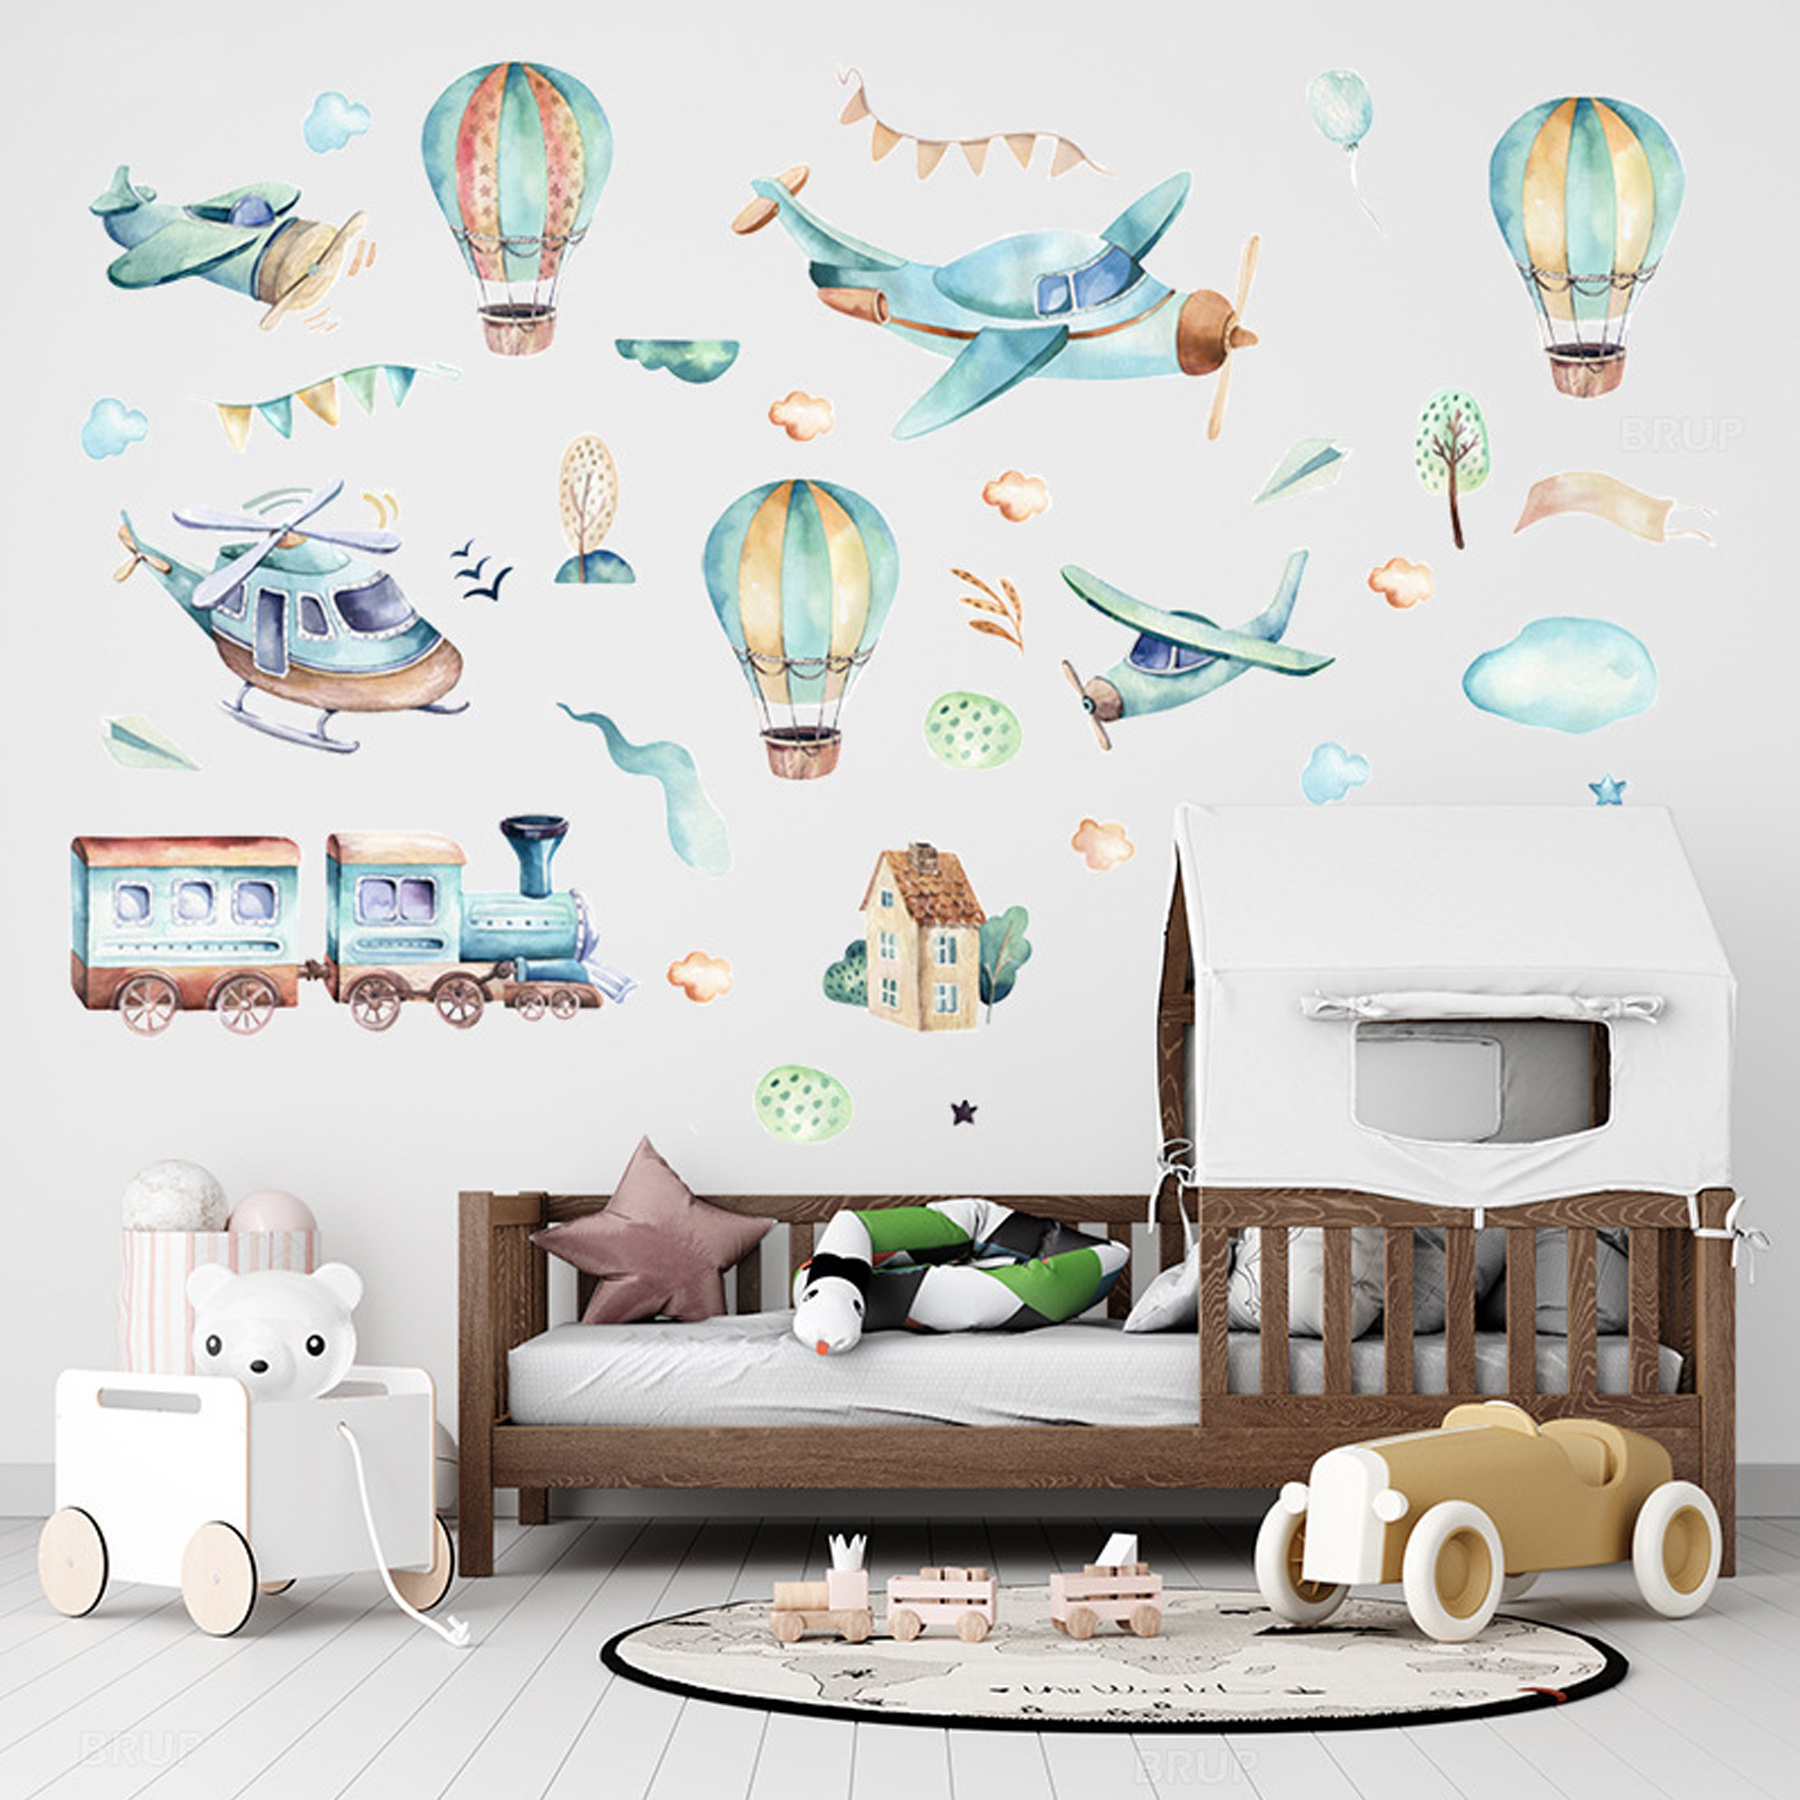 Sipo Wall stickers Airplanes